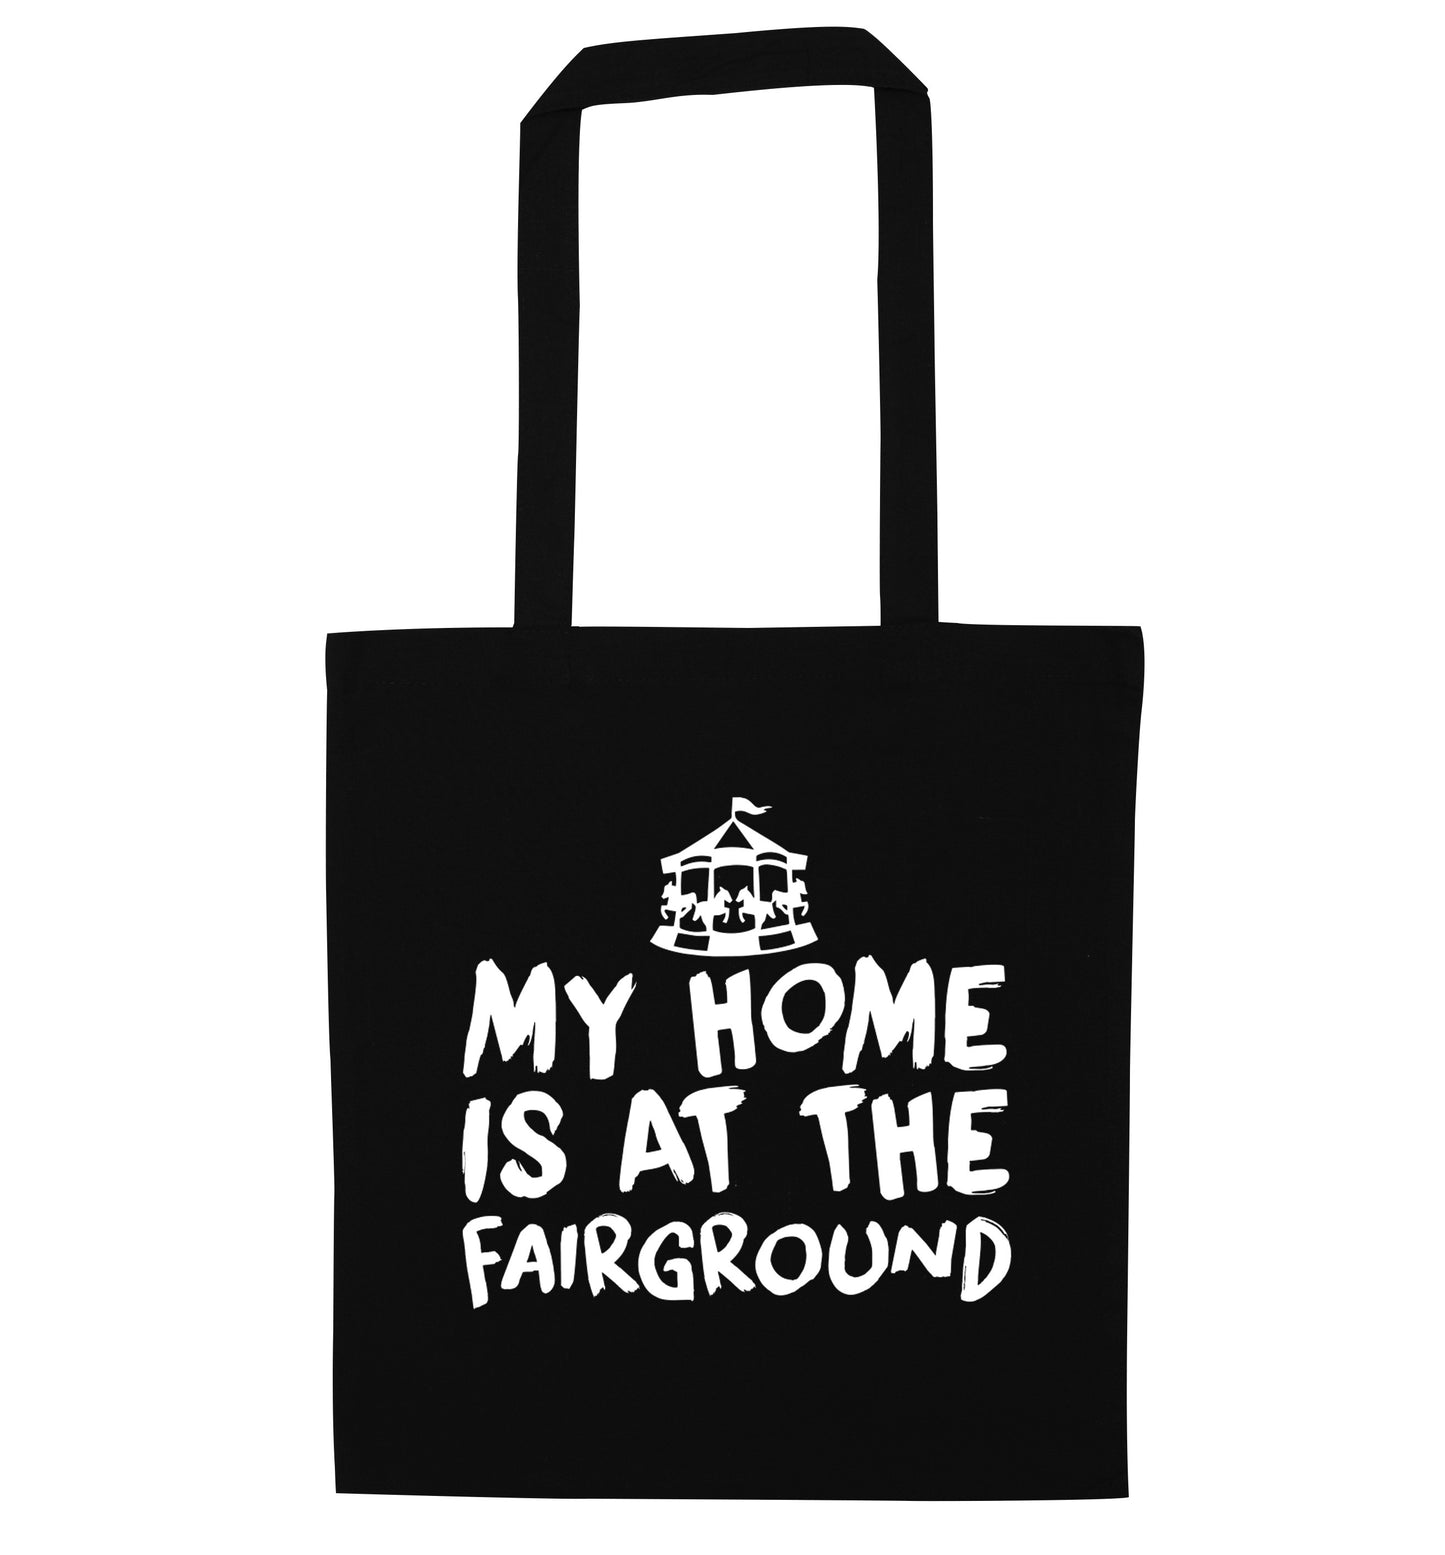 My home is at the fairground black tote bag